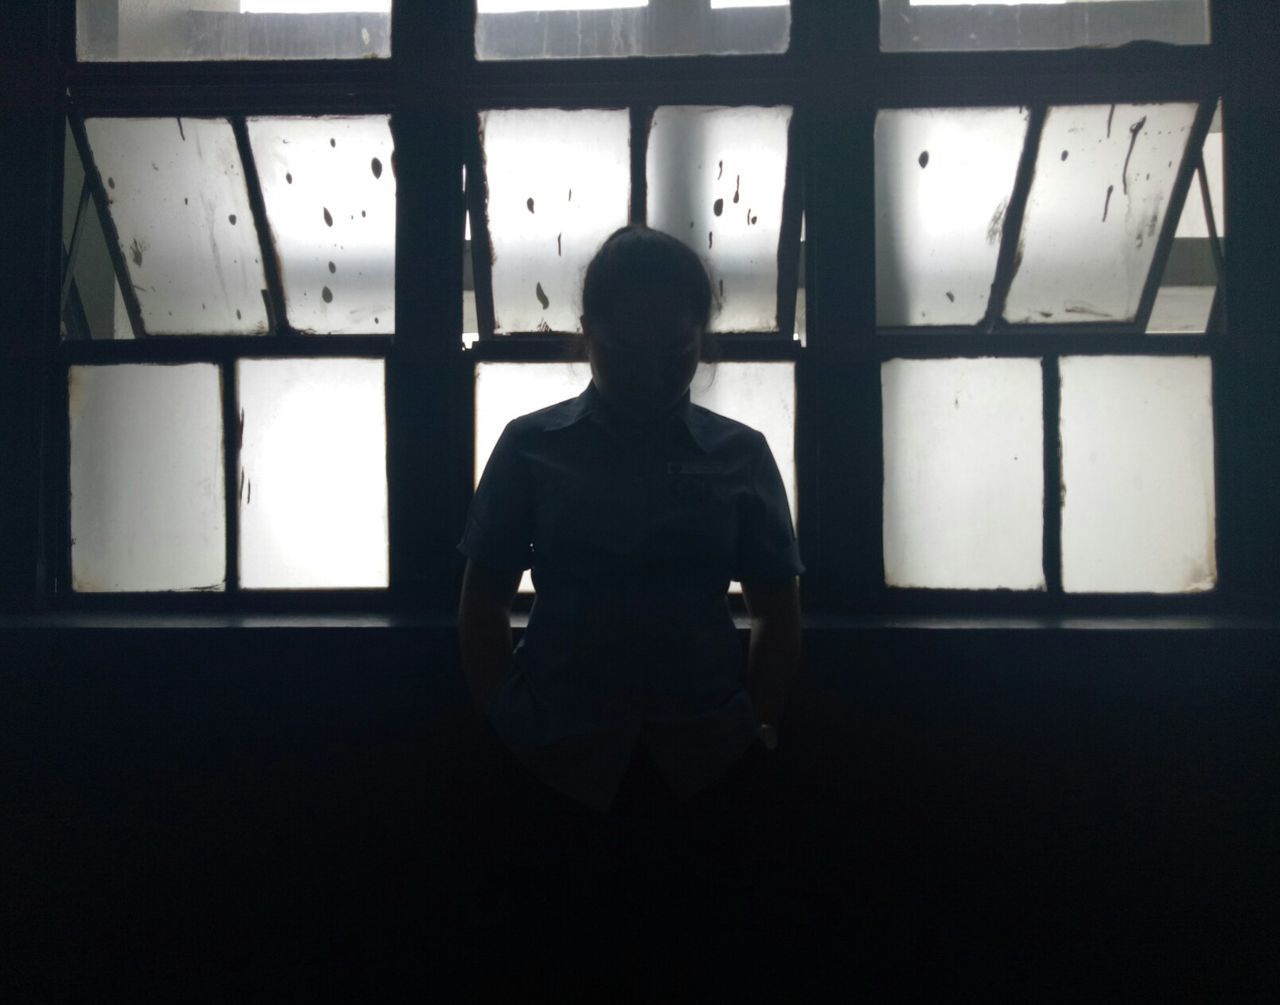 window, indoors, one person, standing, silhouette, real people, men, day, people